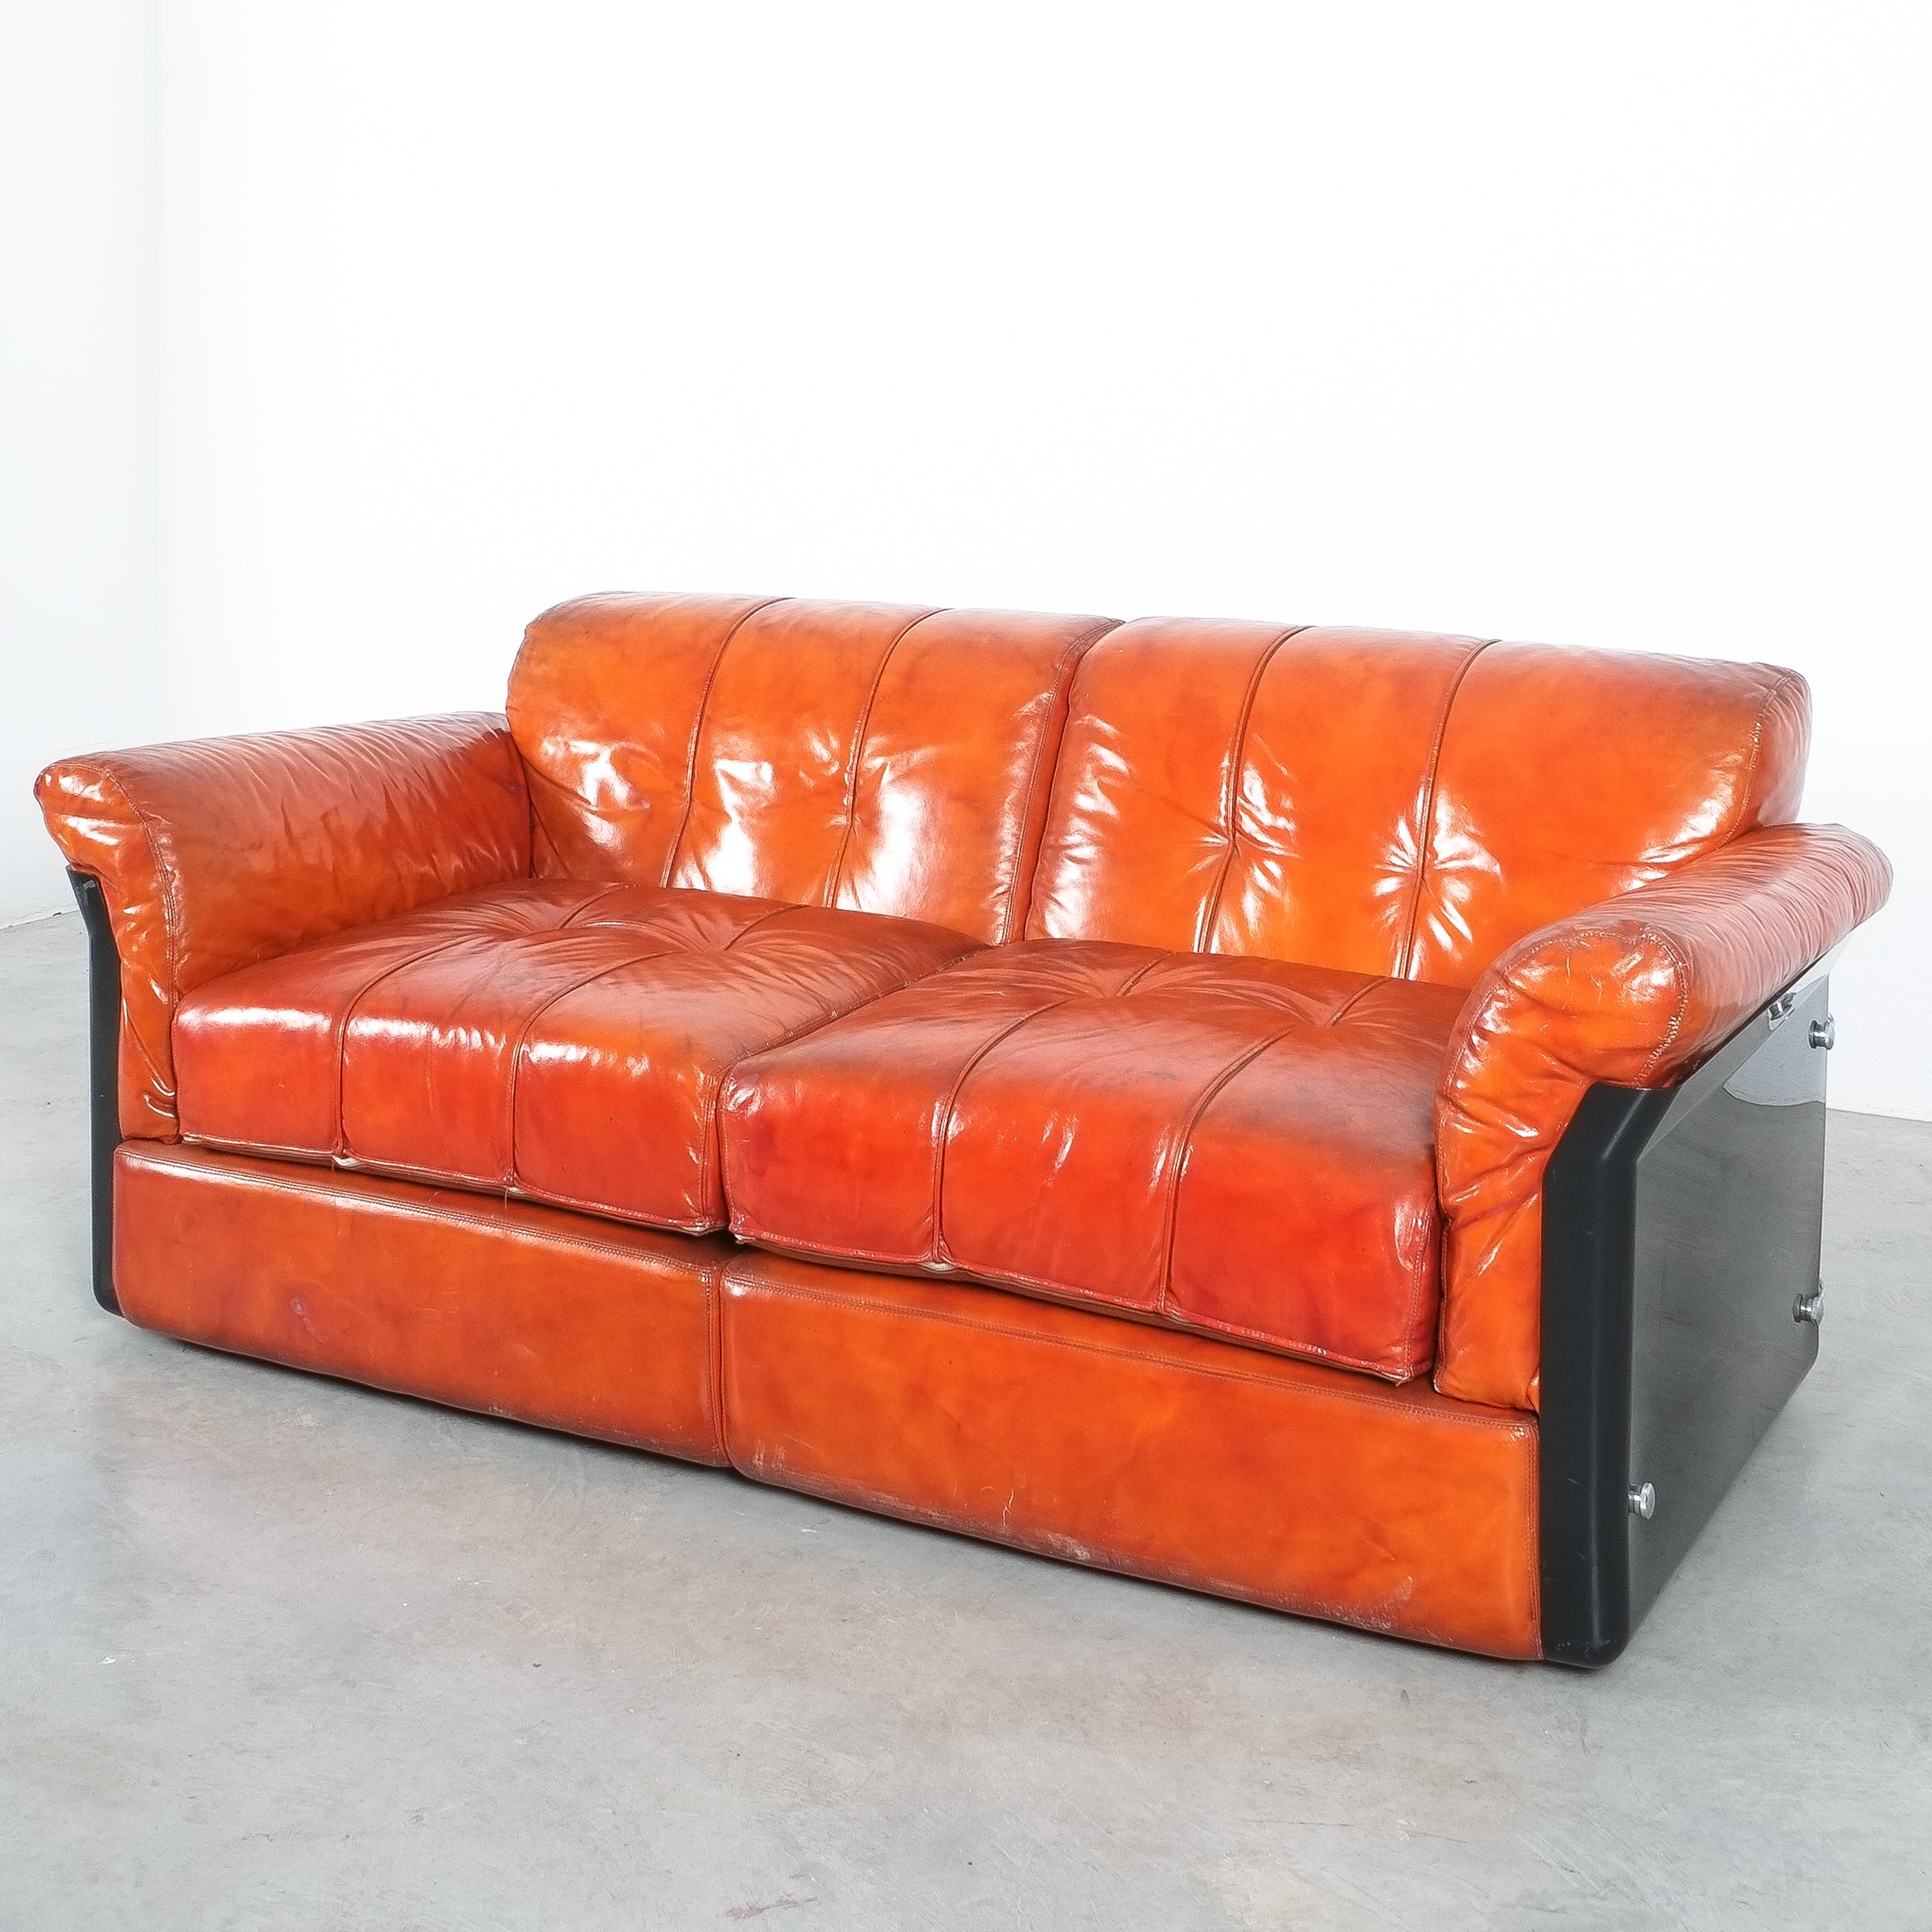 Small lacquered leather sofa in lucite frame by Vittorio Introini, circa 1970

Nice two-seater sofa in very well preserved original condition. Freestanding small 62